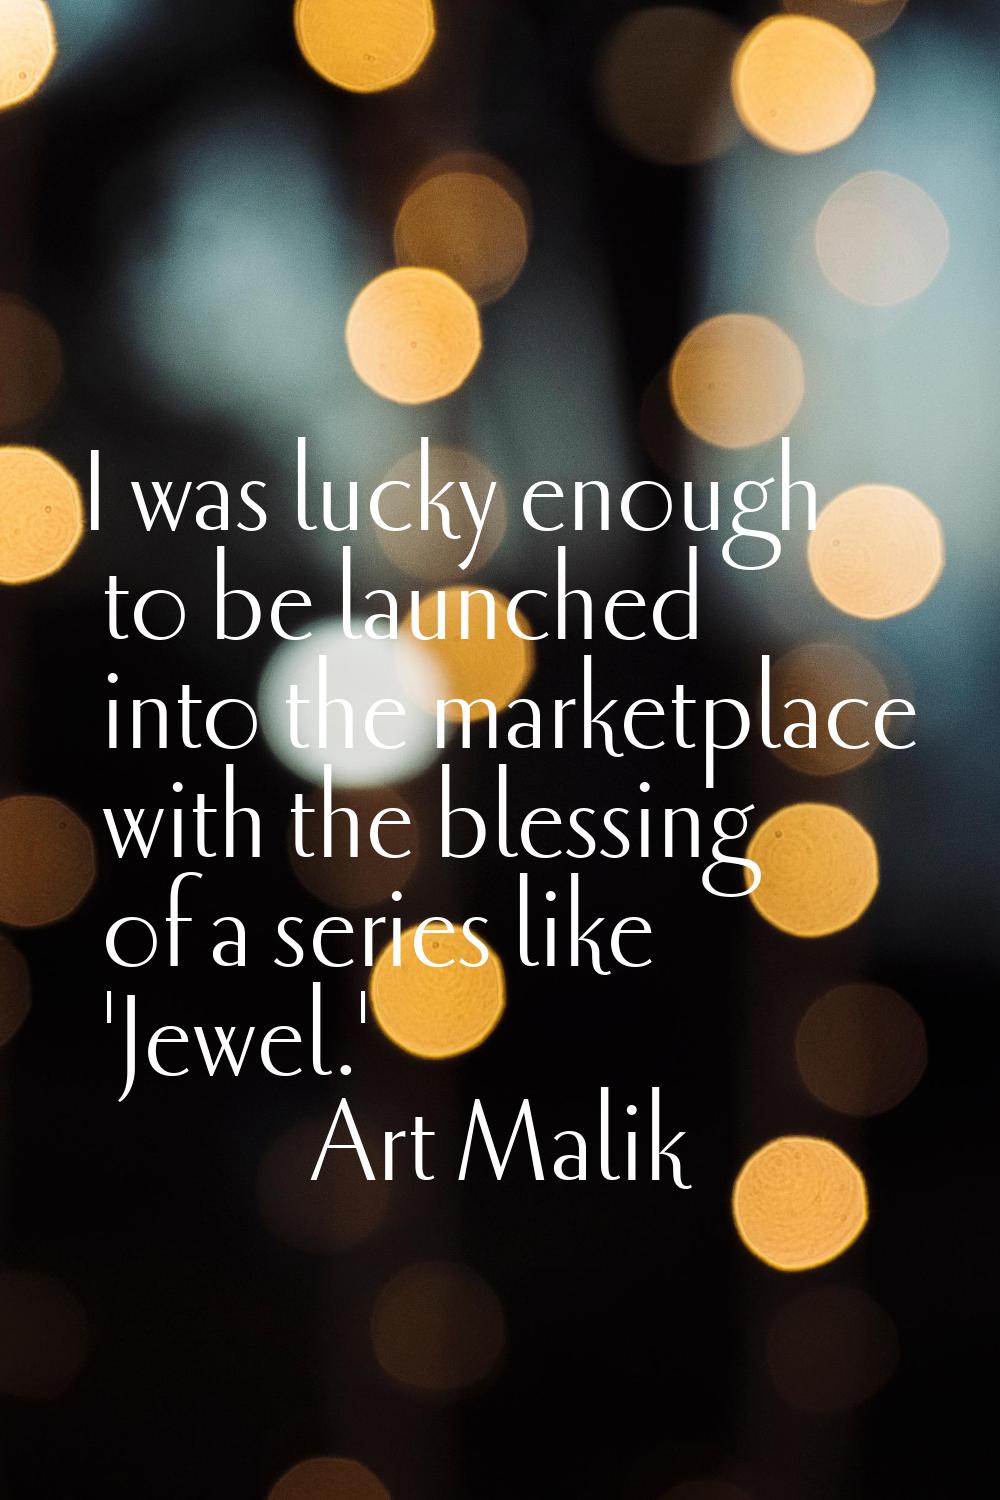 I was lucky enough to be launched into the marketplace with the blessing of a series like 'Jewel.'